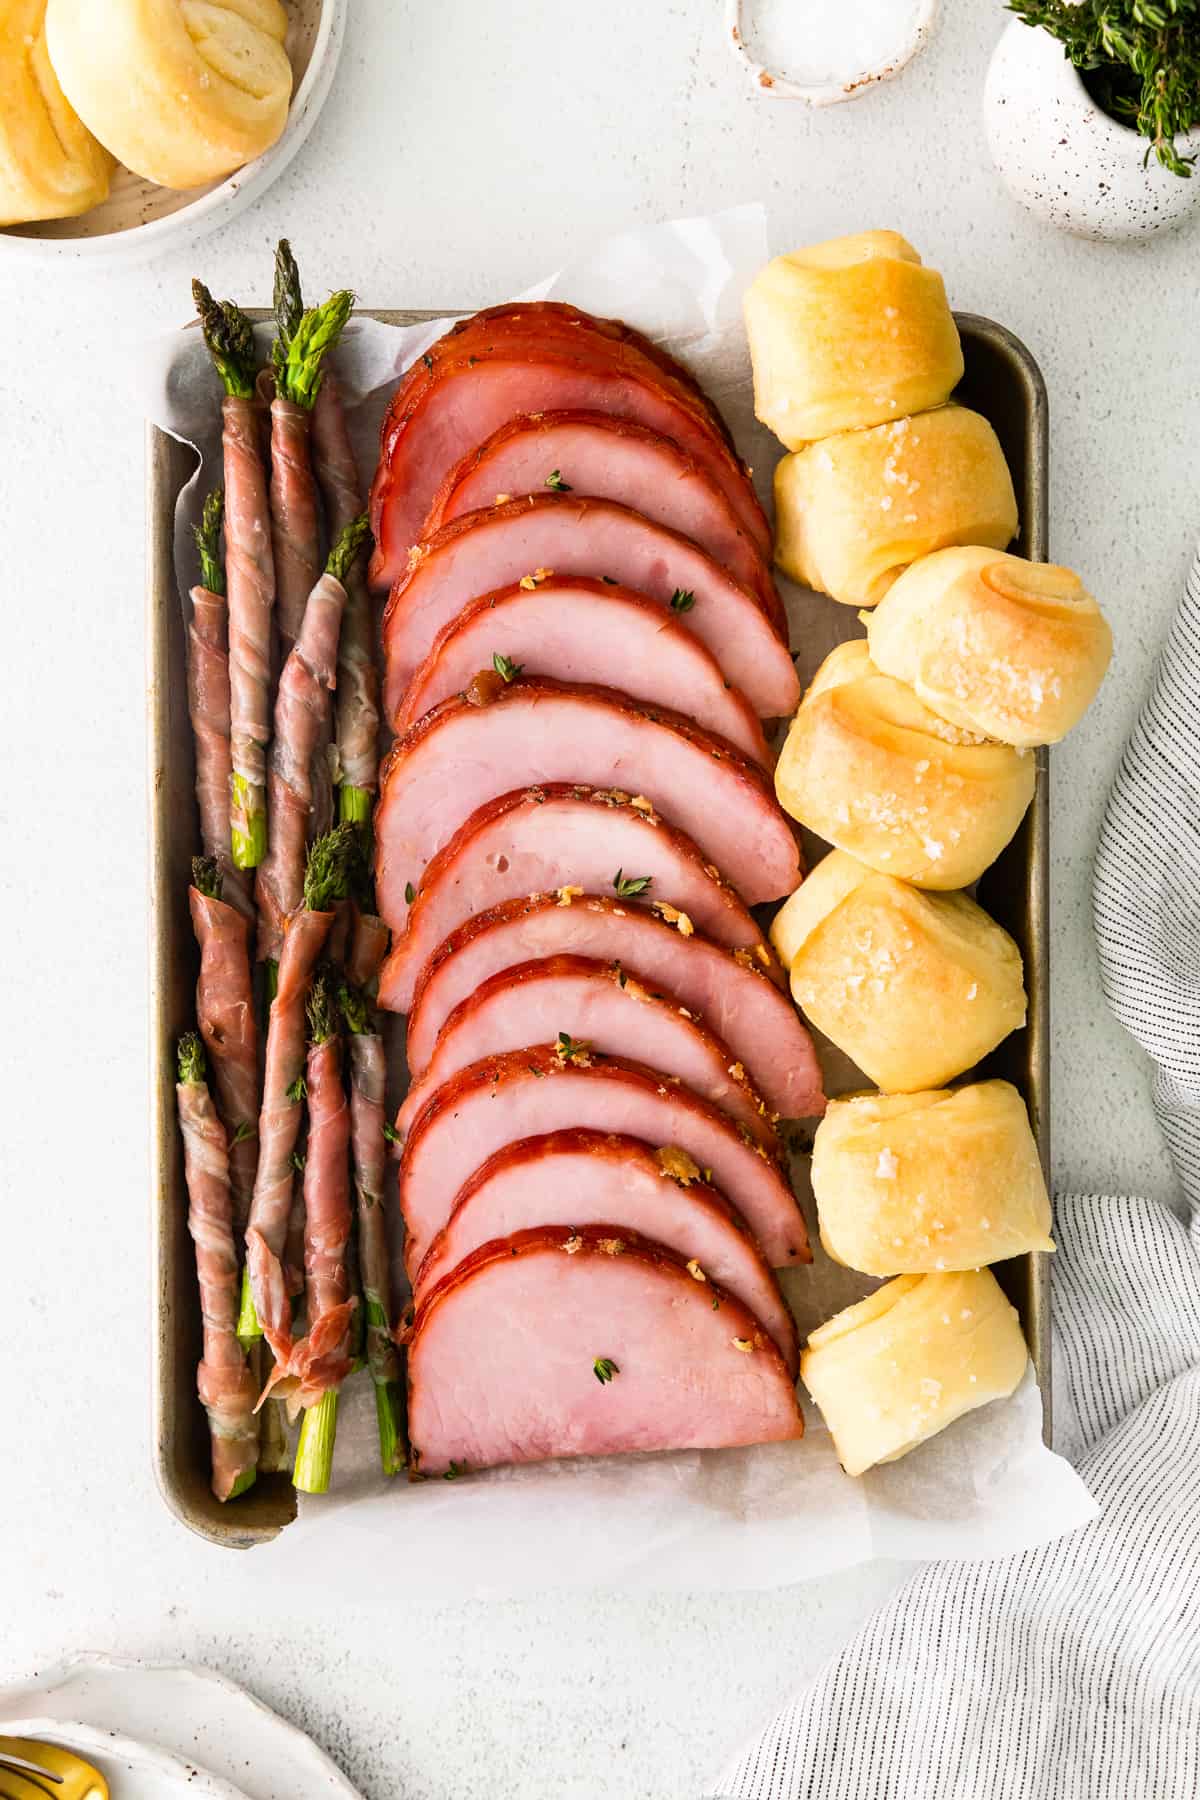 ham, prosciutto wrapped asparagus, and rolls on a sheet pan after baking.